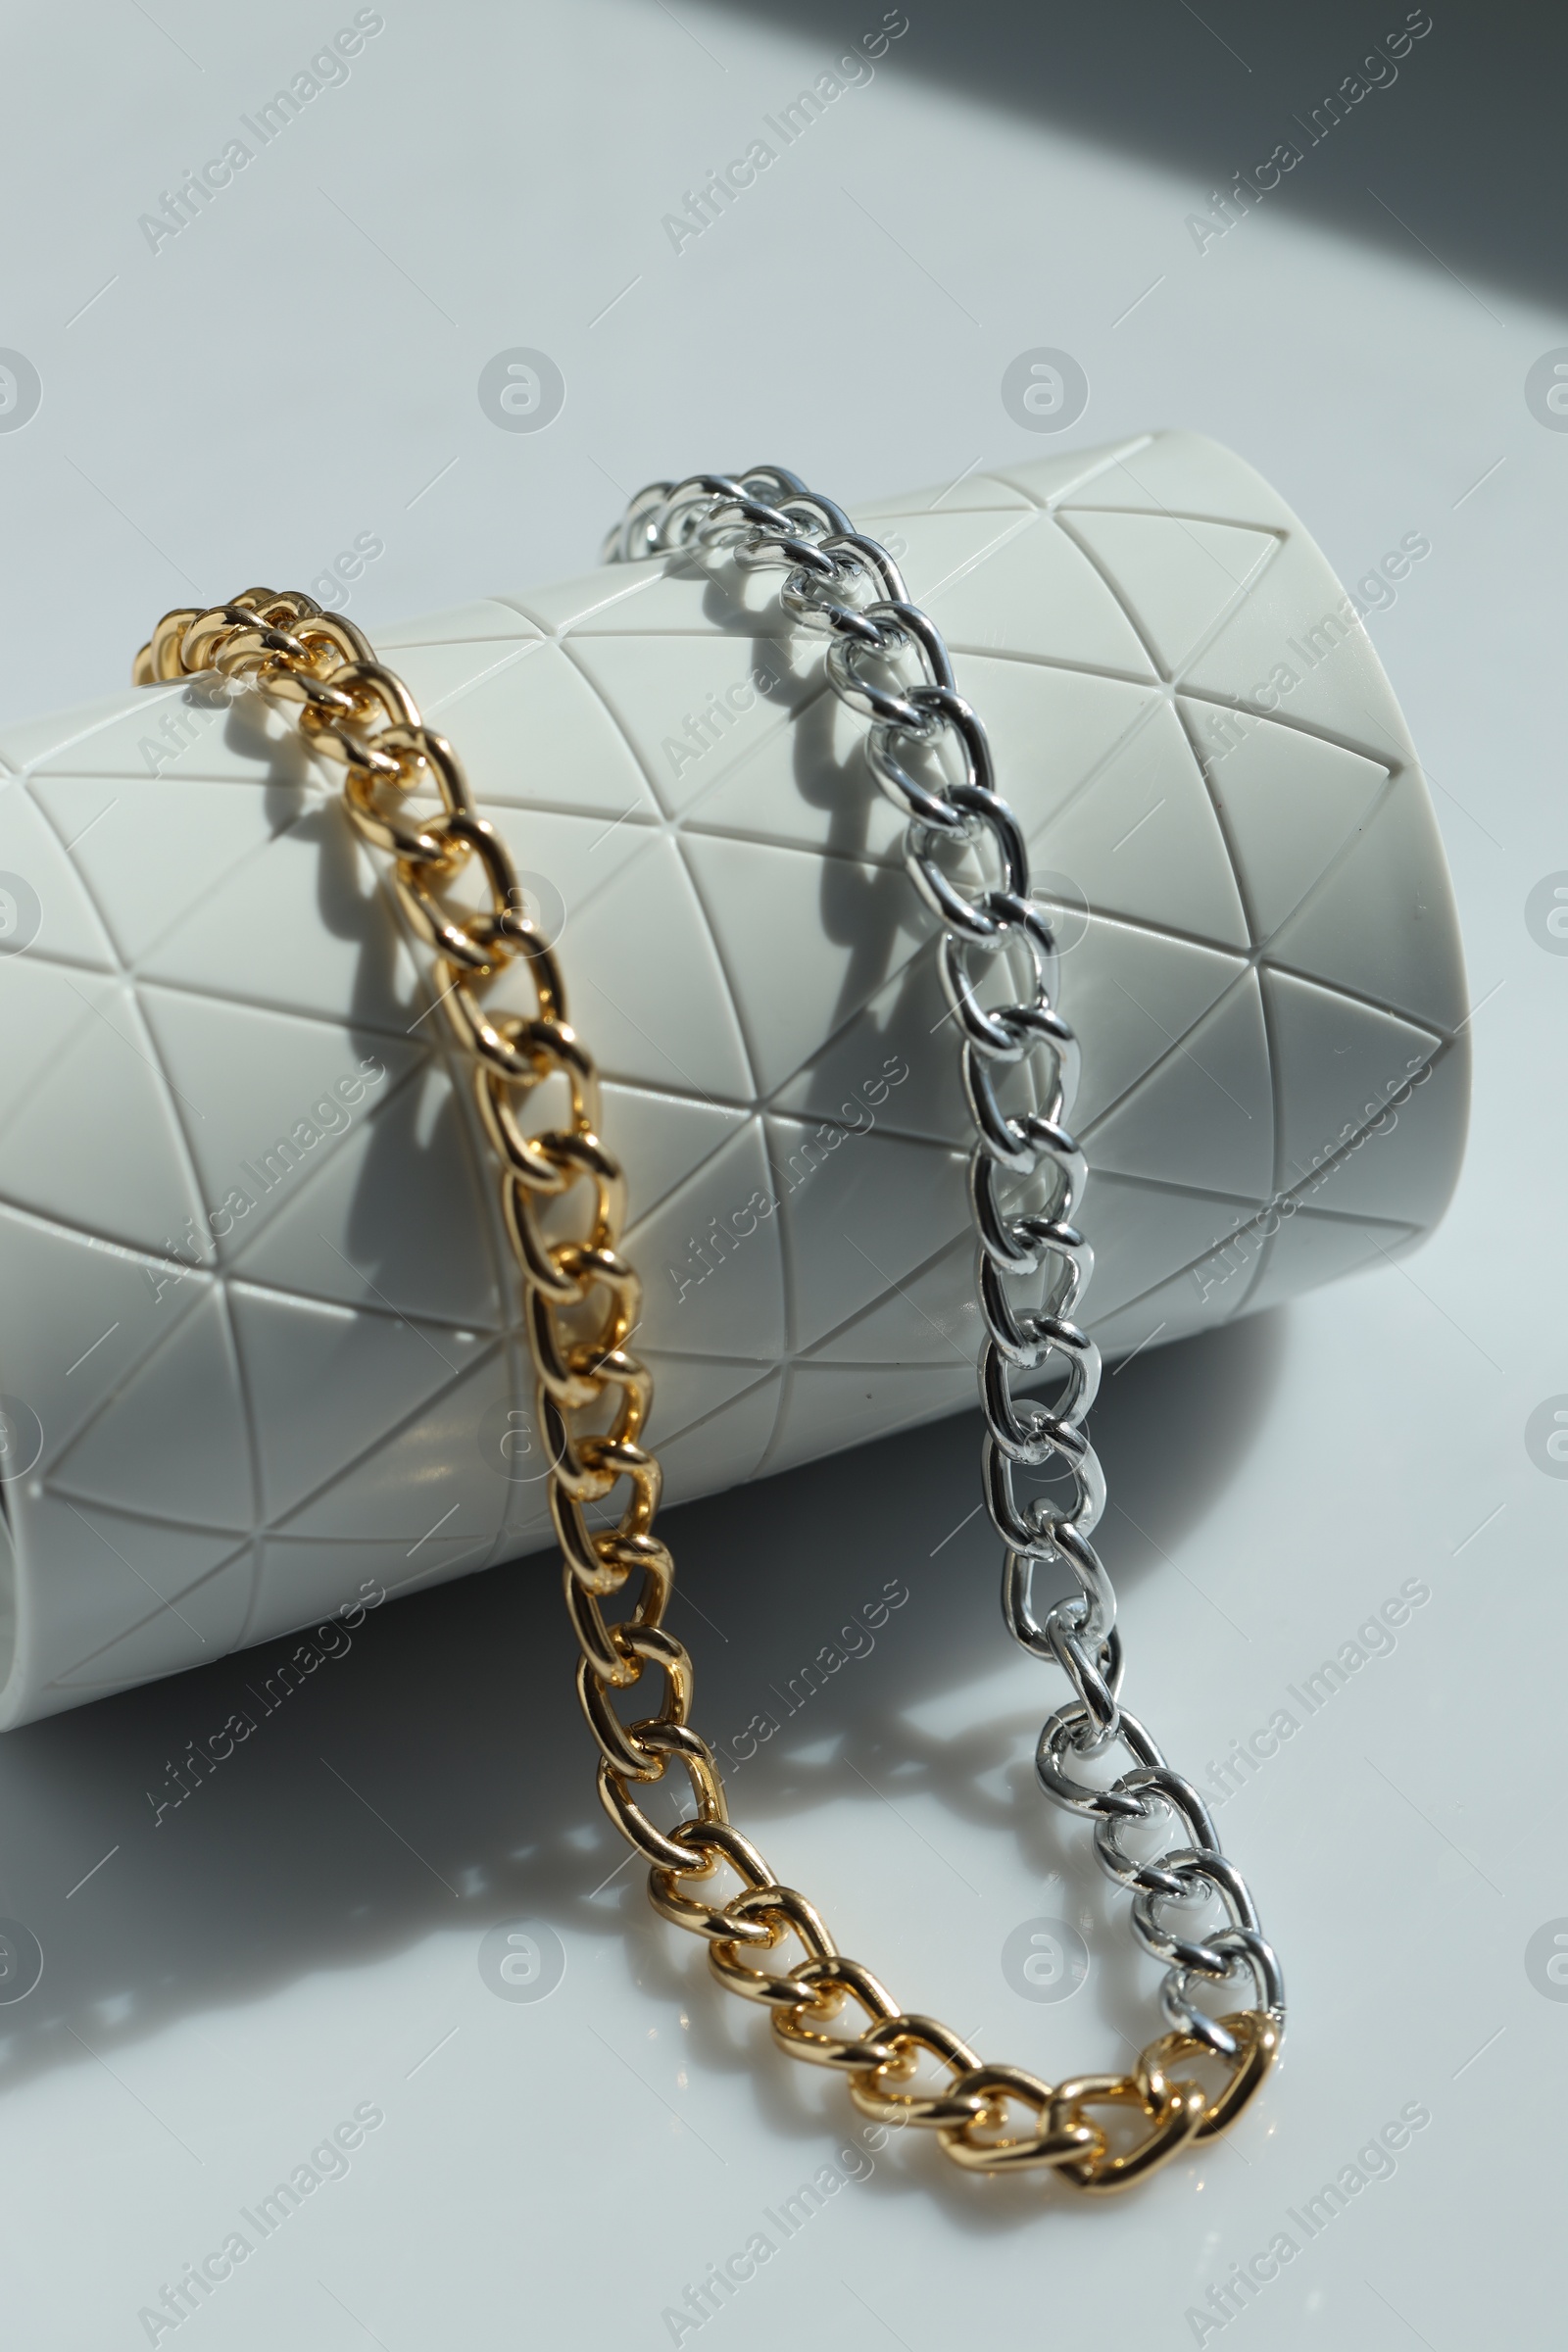 Photo of Metal chain on white table, closeup. Luxury jewelry